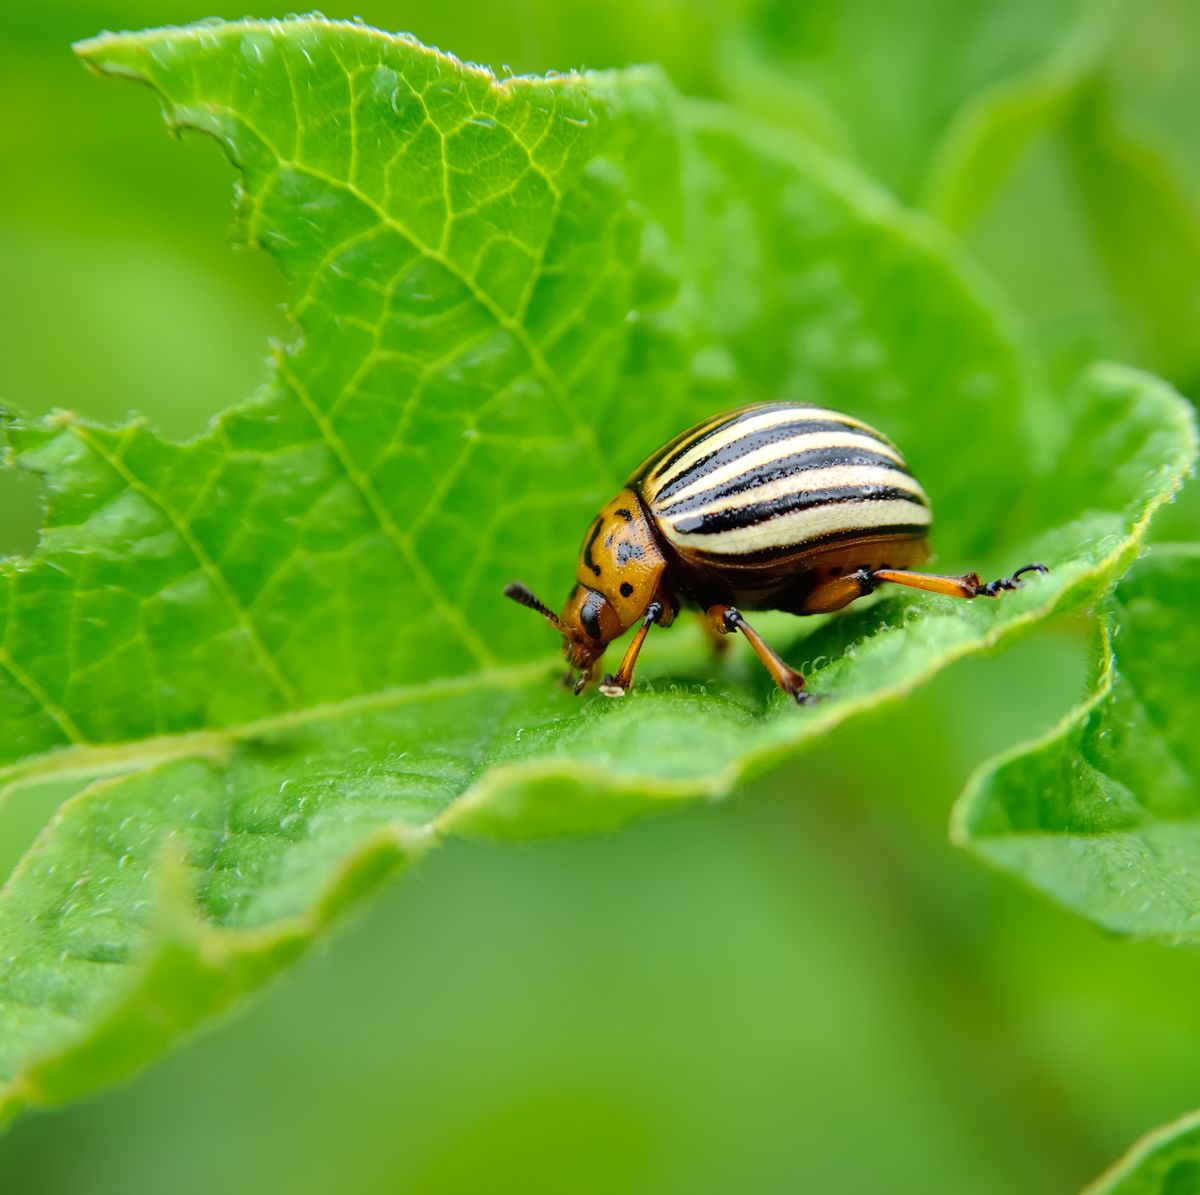 https://hips.hearstapps.com/hmg-prod/images/colorado-beetle-eats-a-potato-leaves-young-royalty-free-image-542328690-1531259828.jpg?crop=0.665xw:1.00xh;0.284xw,0&resize=1200:*